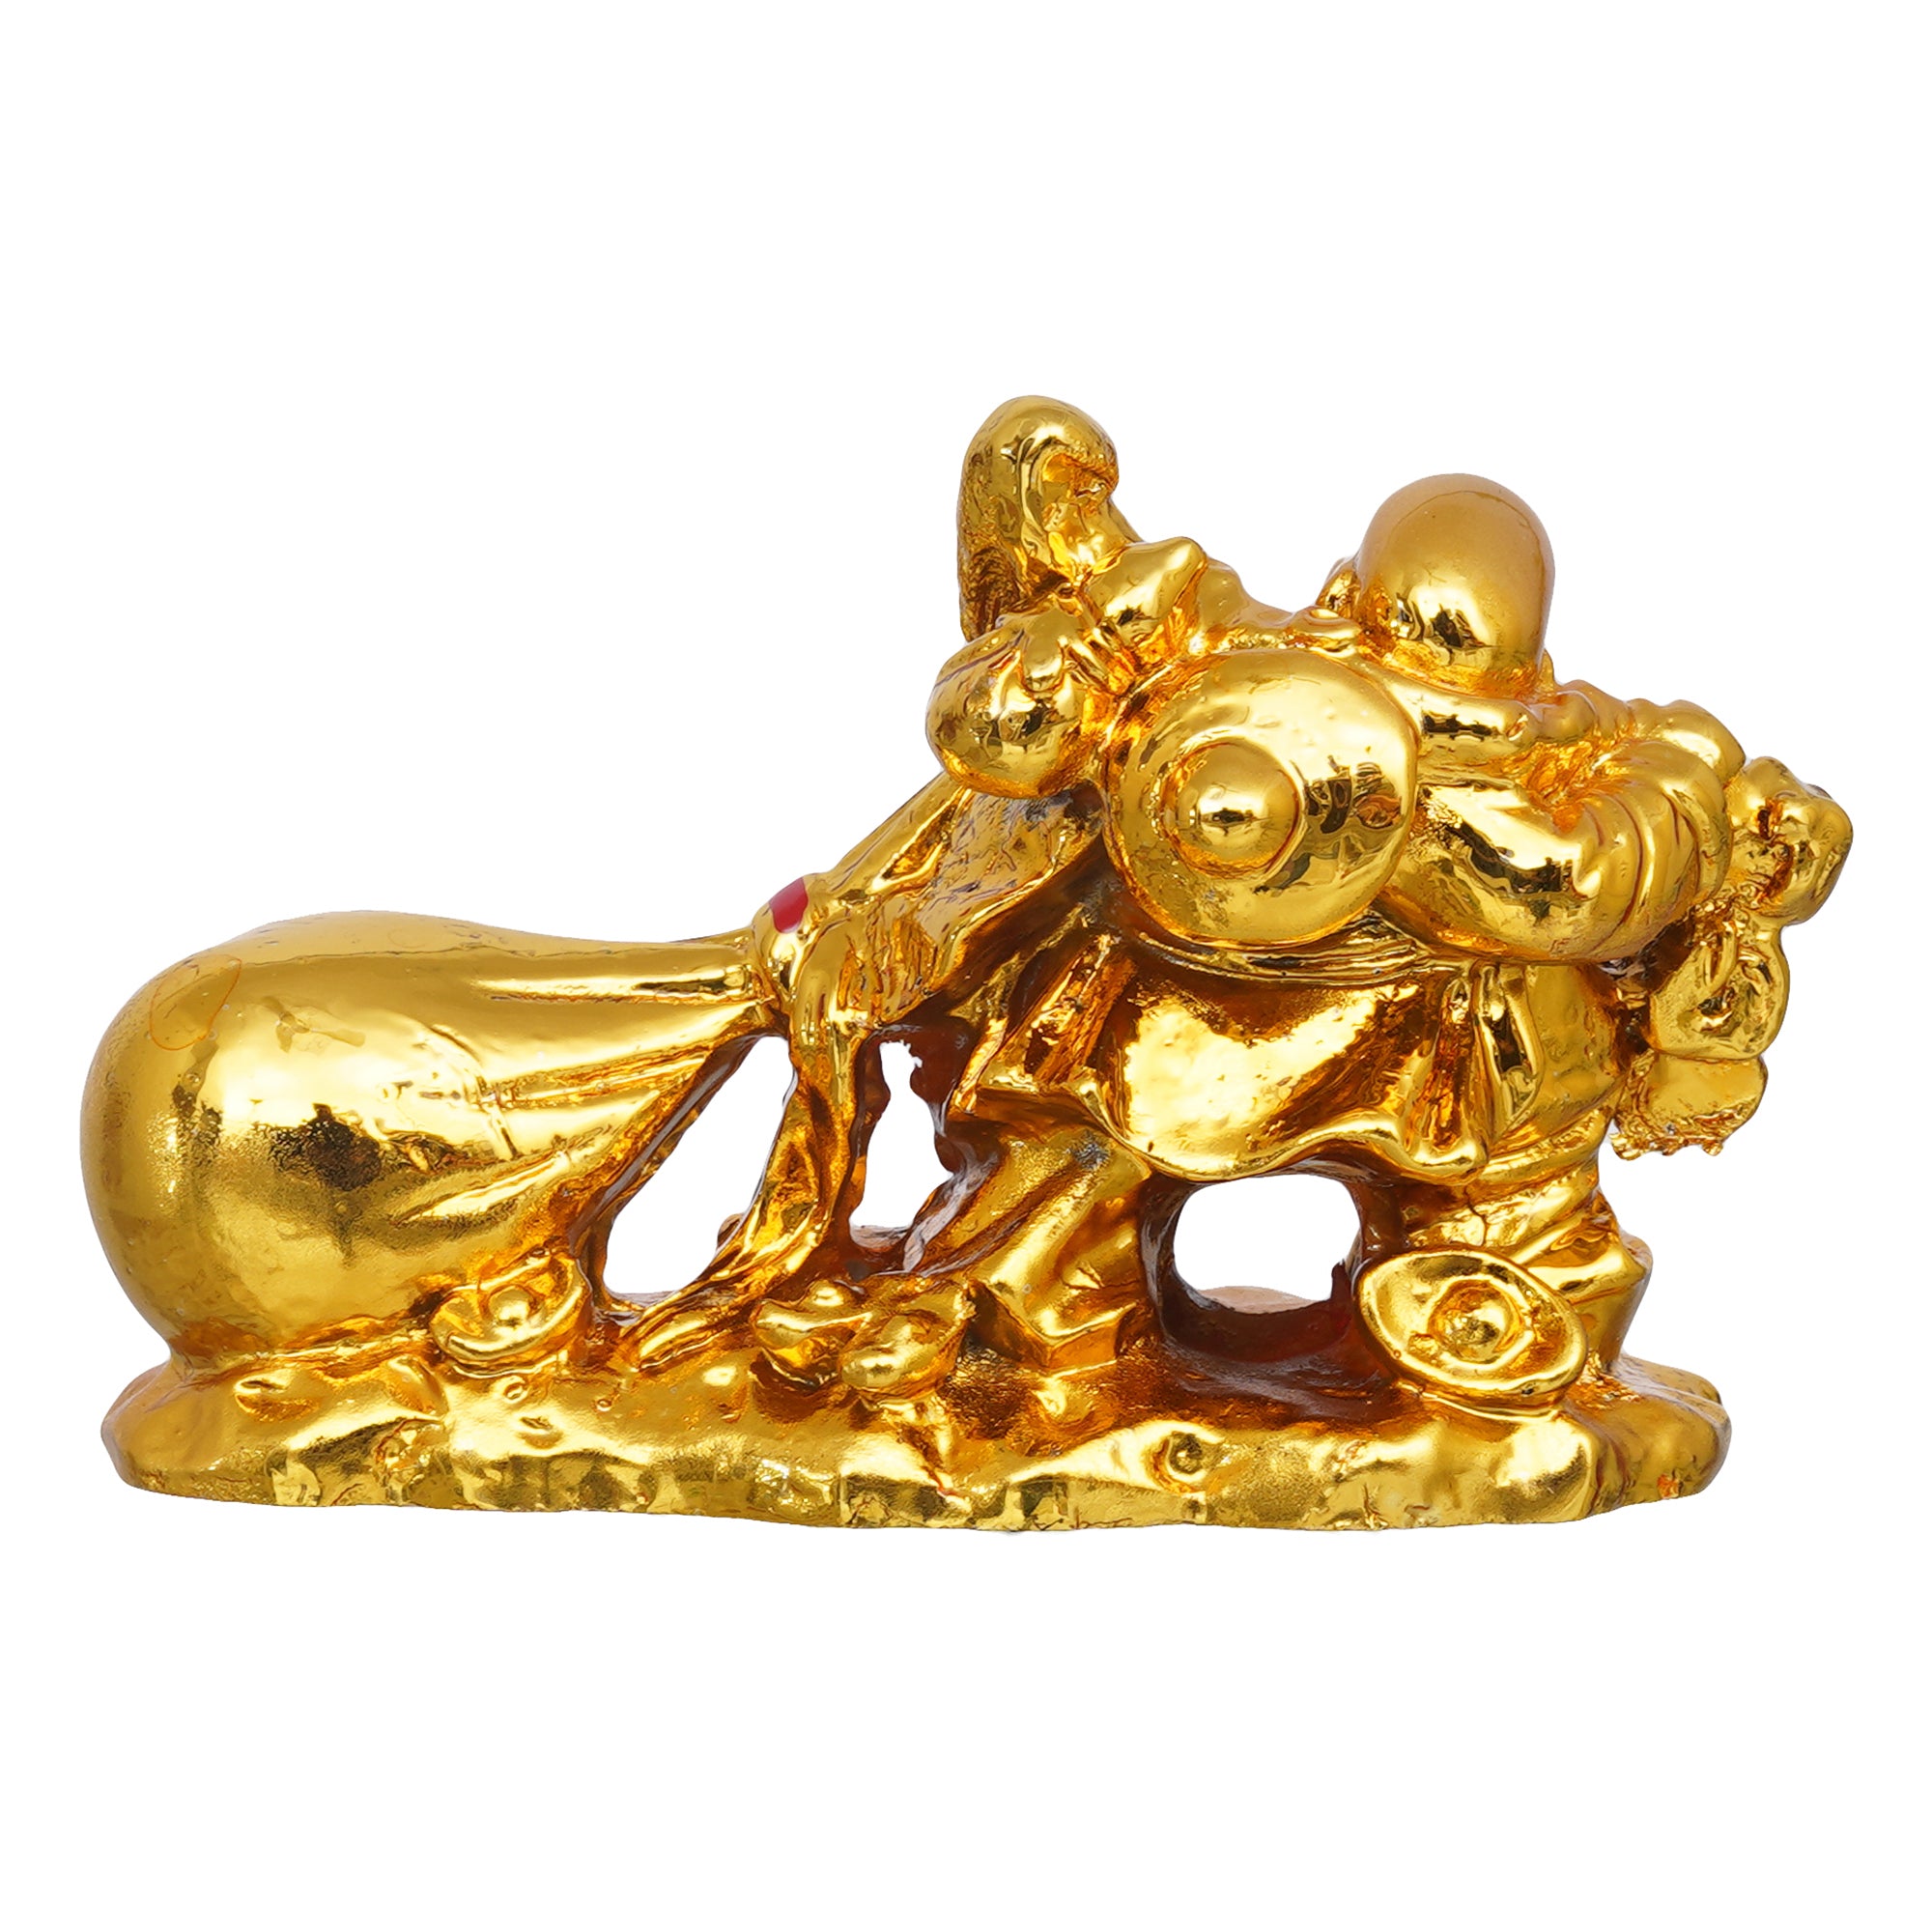 eCraftIndia Golden Polyresin Feng Shui Laughing Buddha Idol with Money Bag For Wealth And Good Luck 8